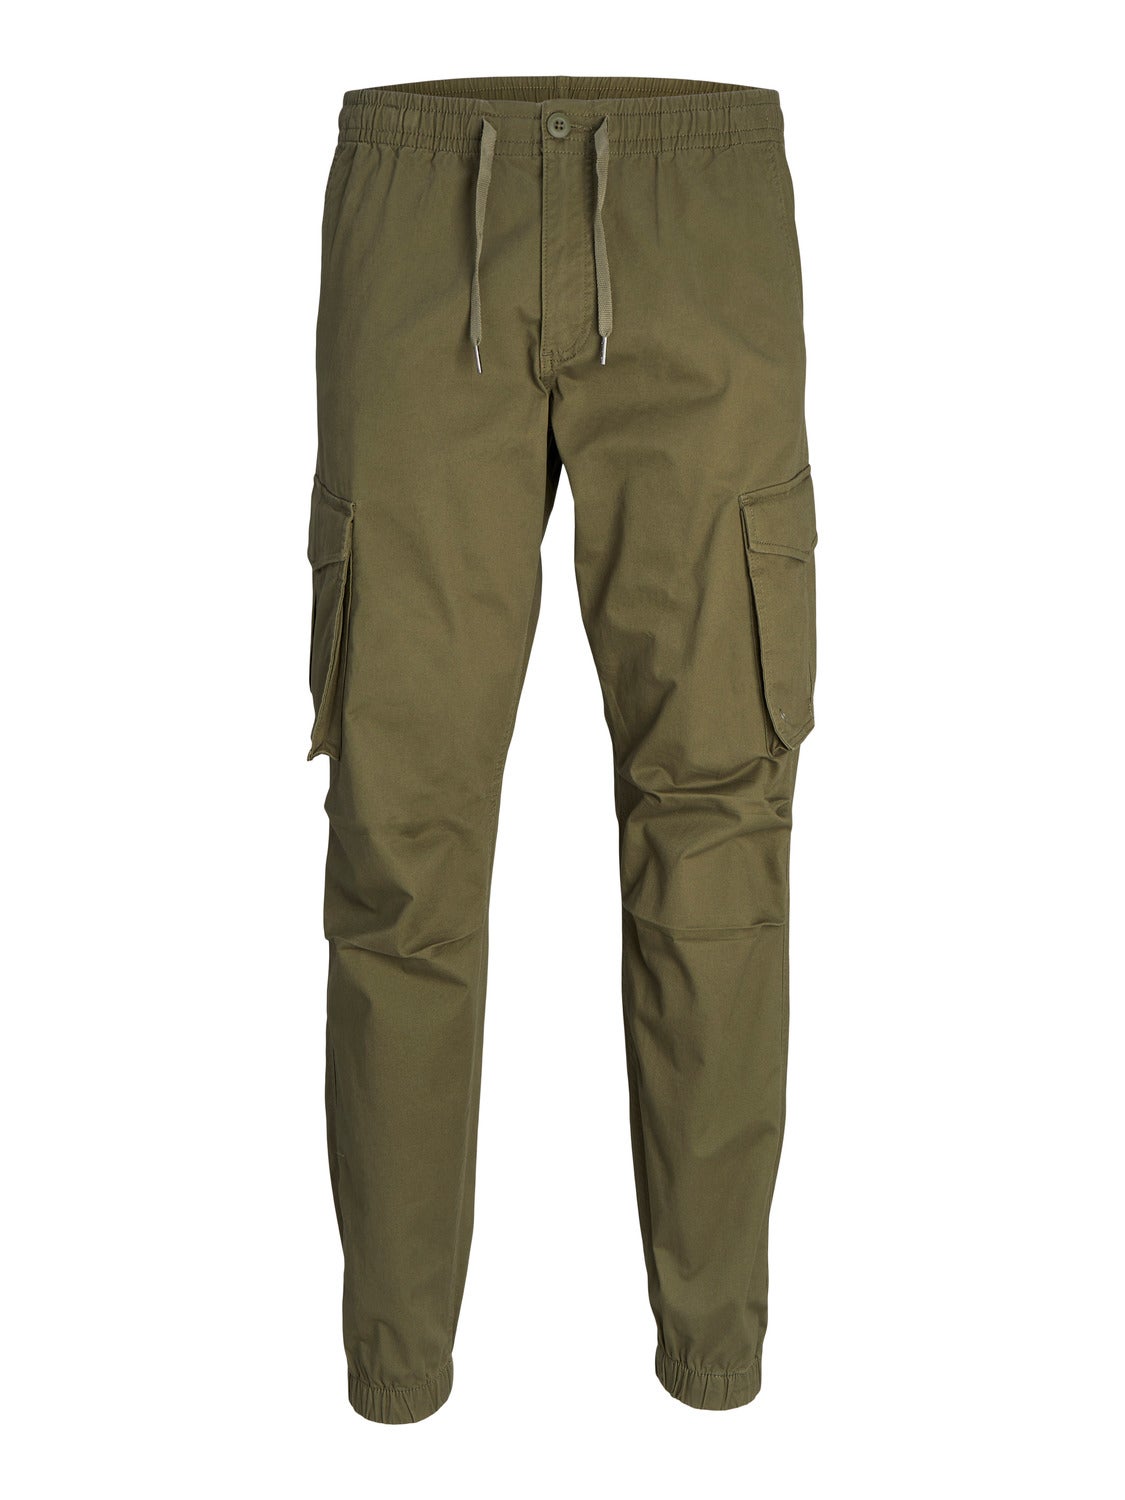 AA Cargo Pants | All American Clothing - All American Clothing Co